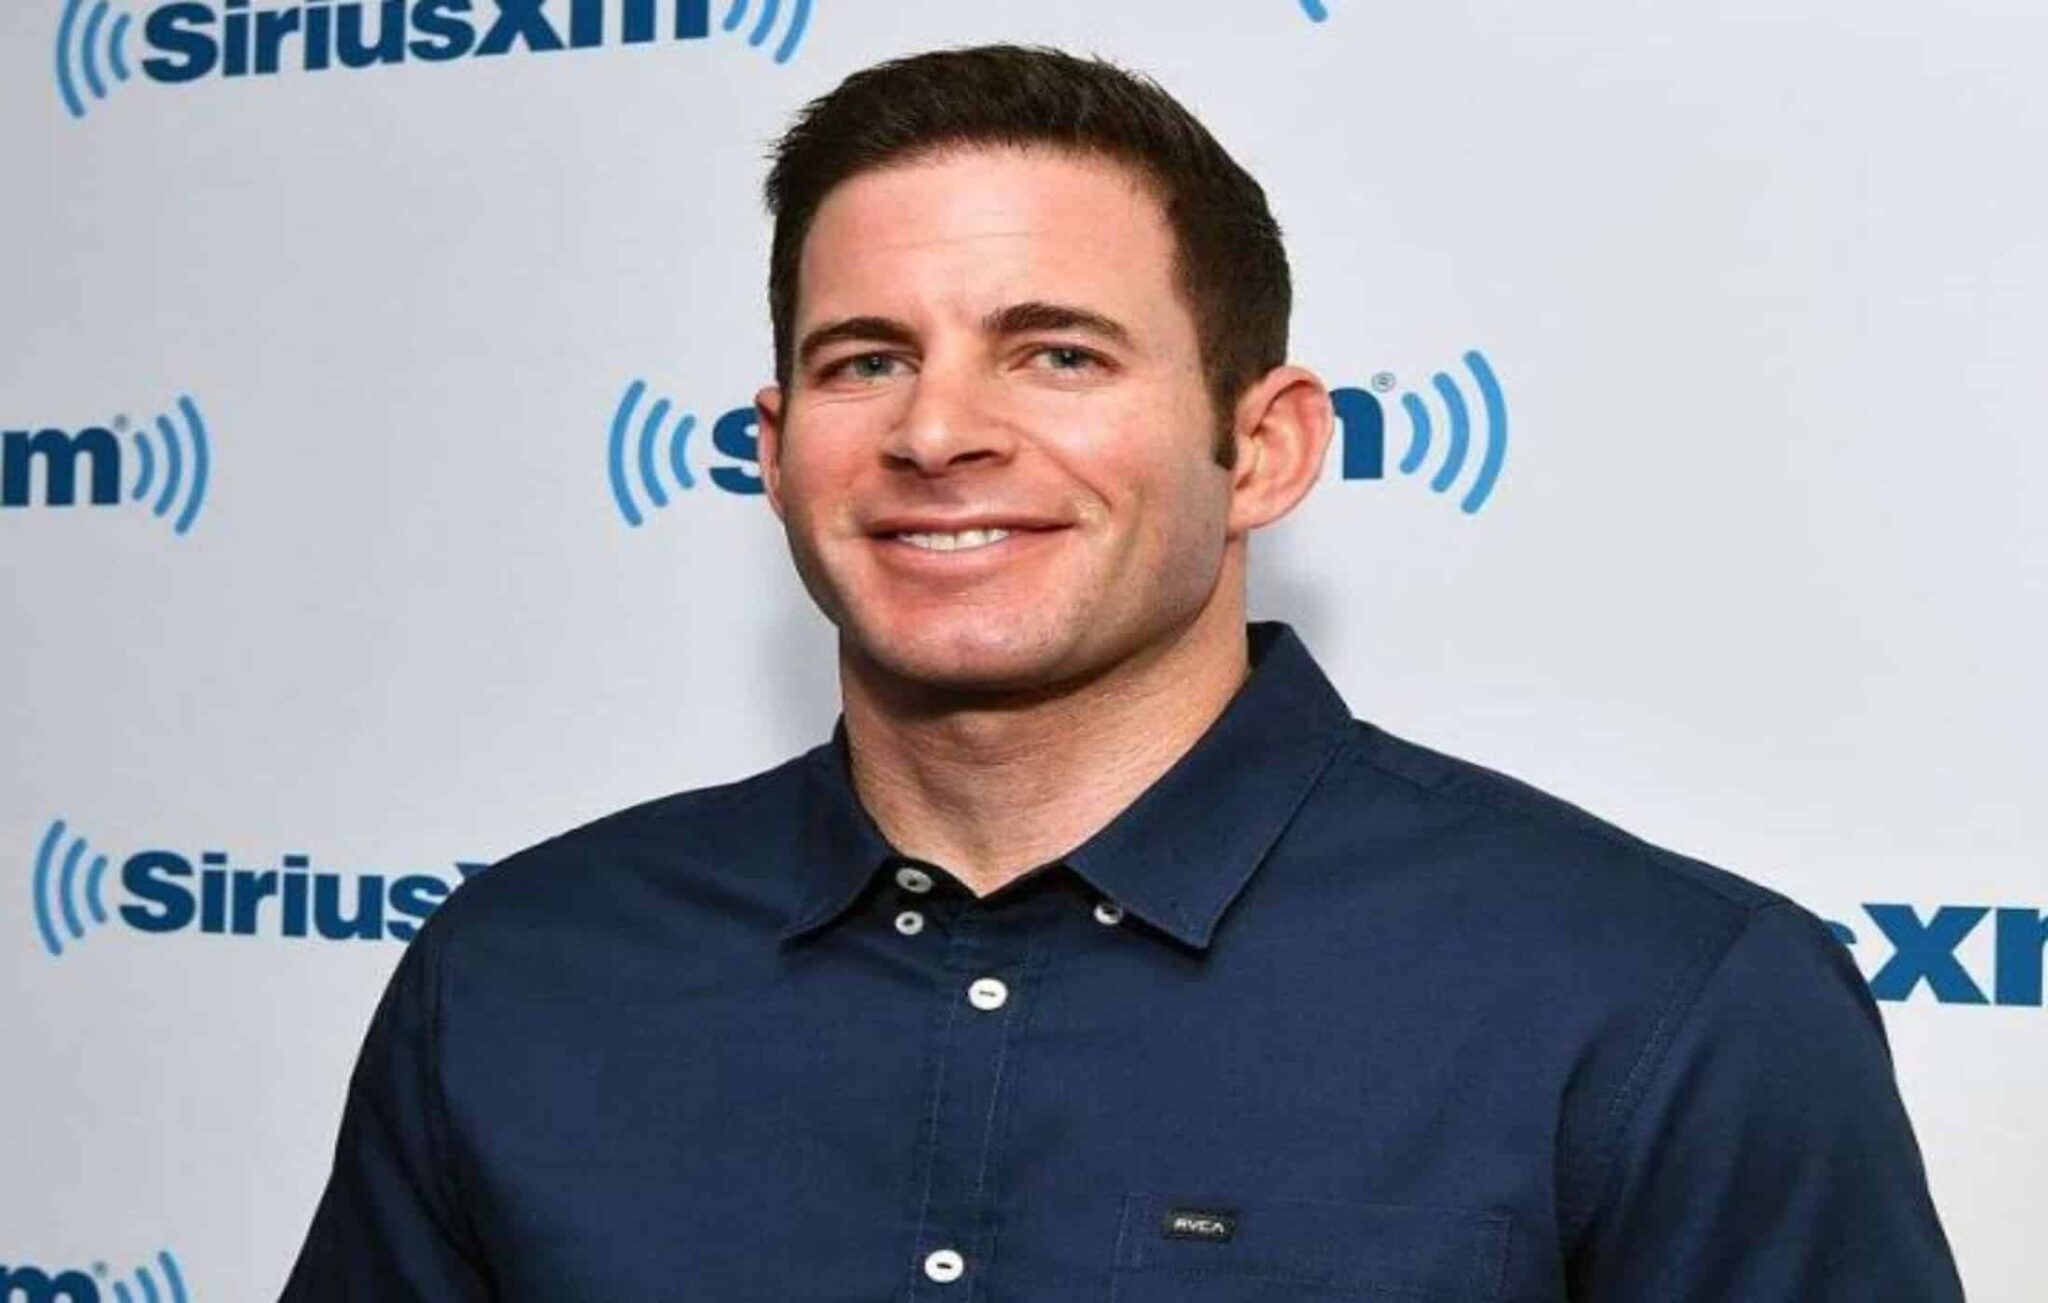 Tarek El Moussa net worth, age, height, wiki, family, biography and